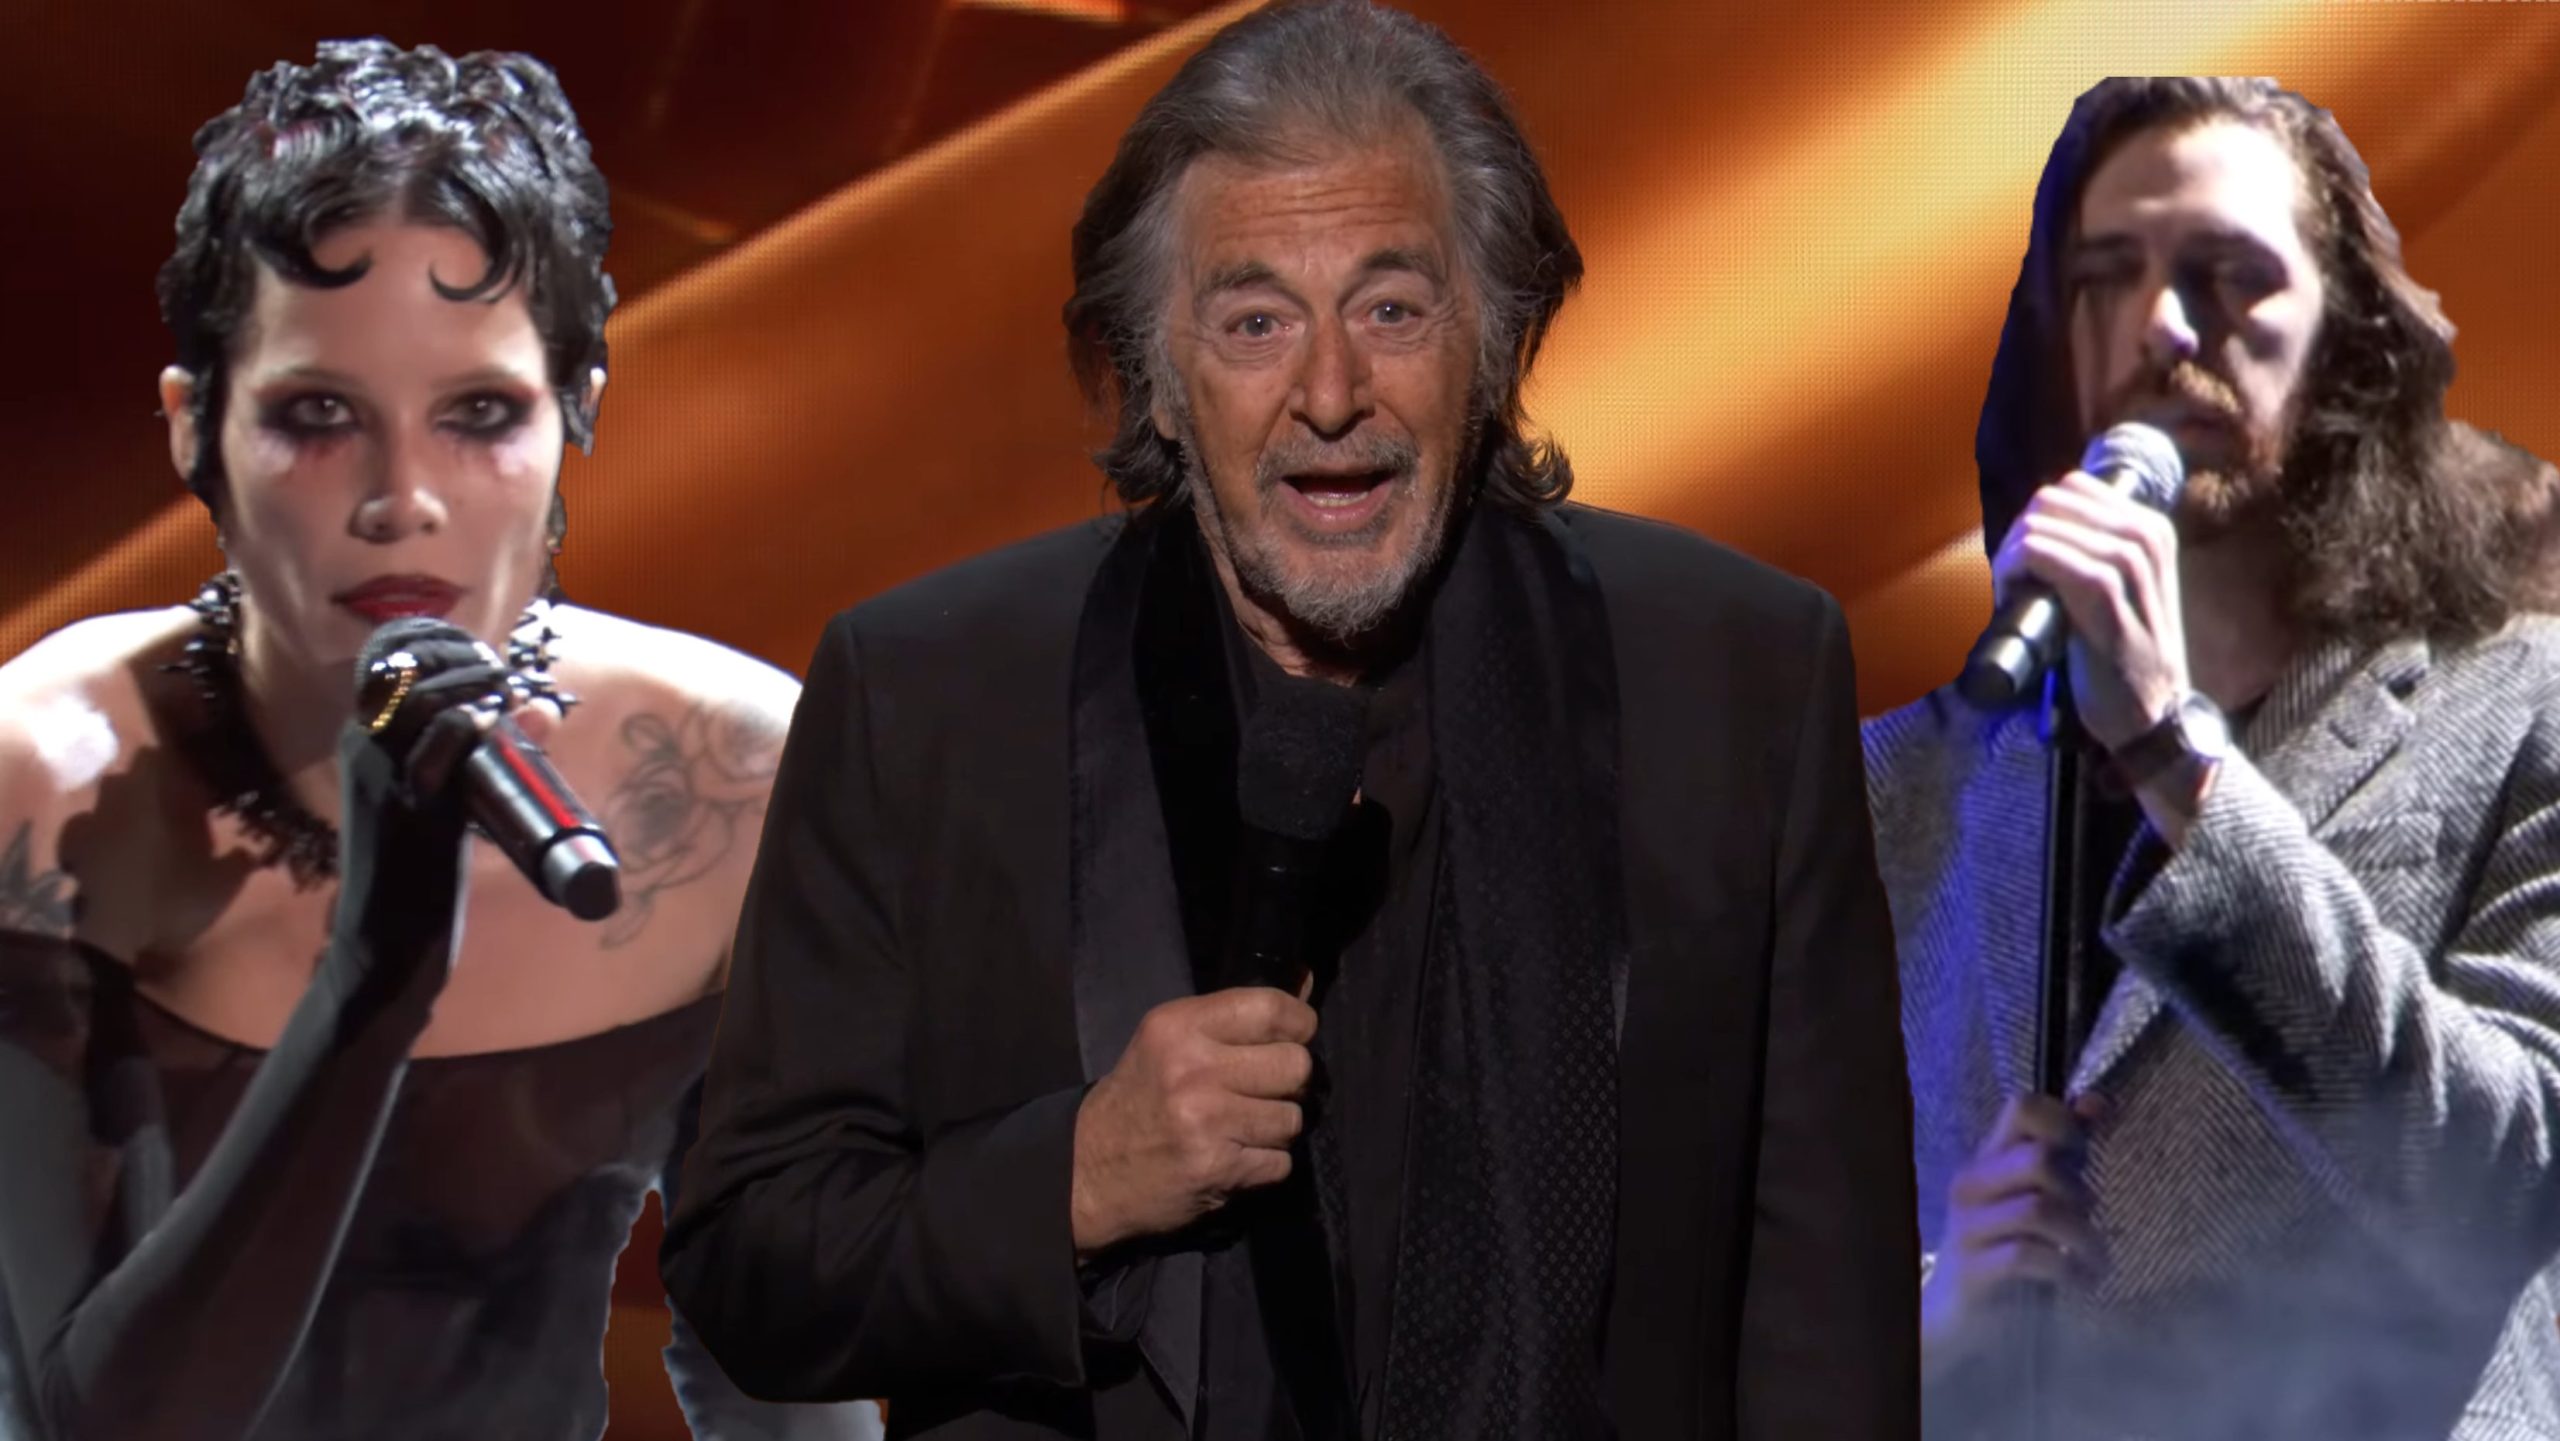 Al Pacino presented Christopher Judge with his award for best performa